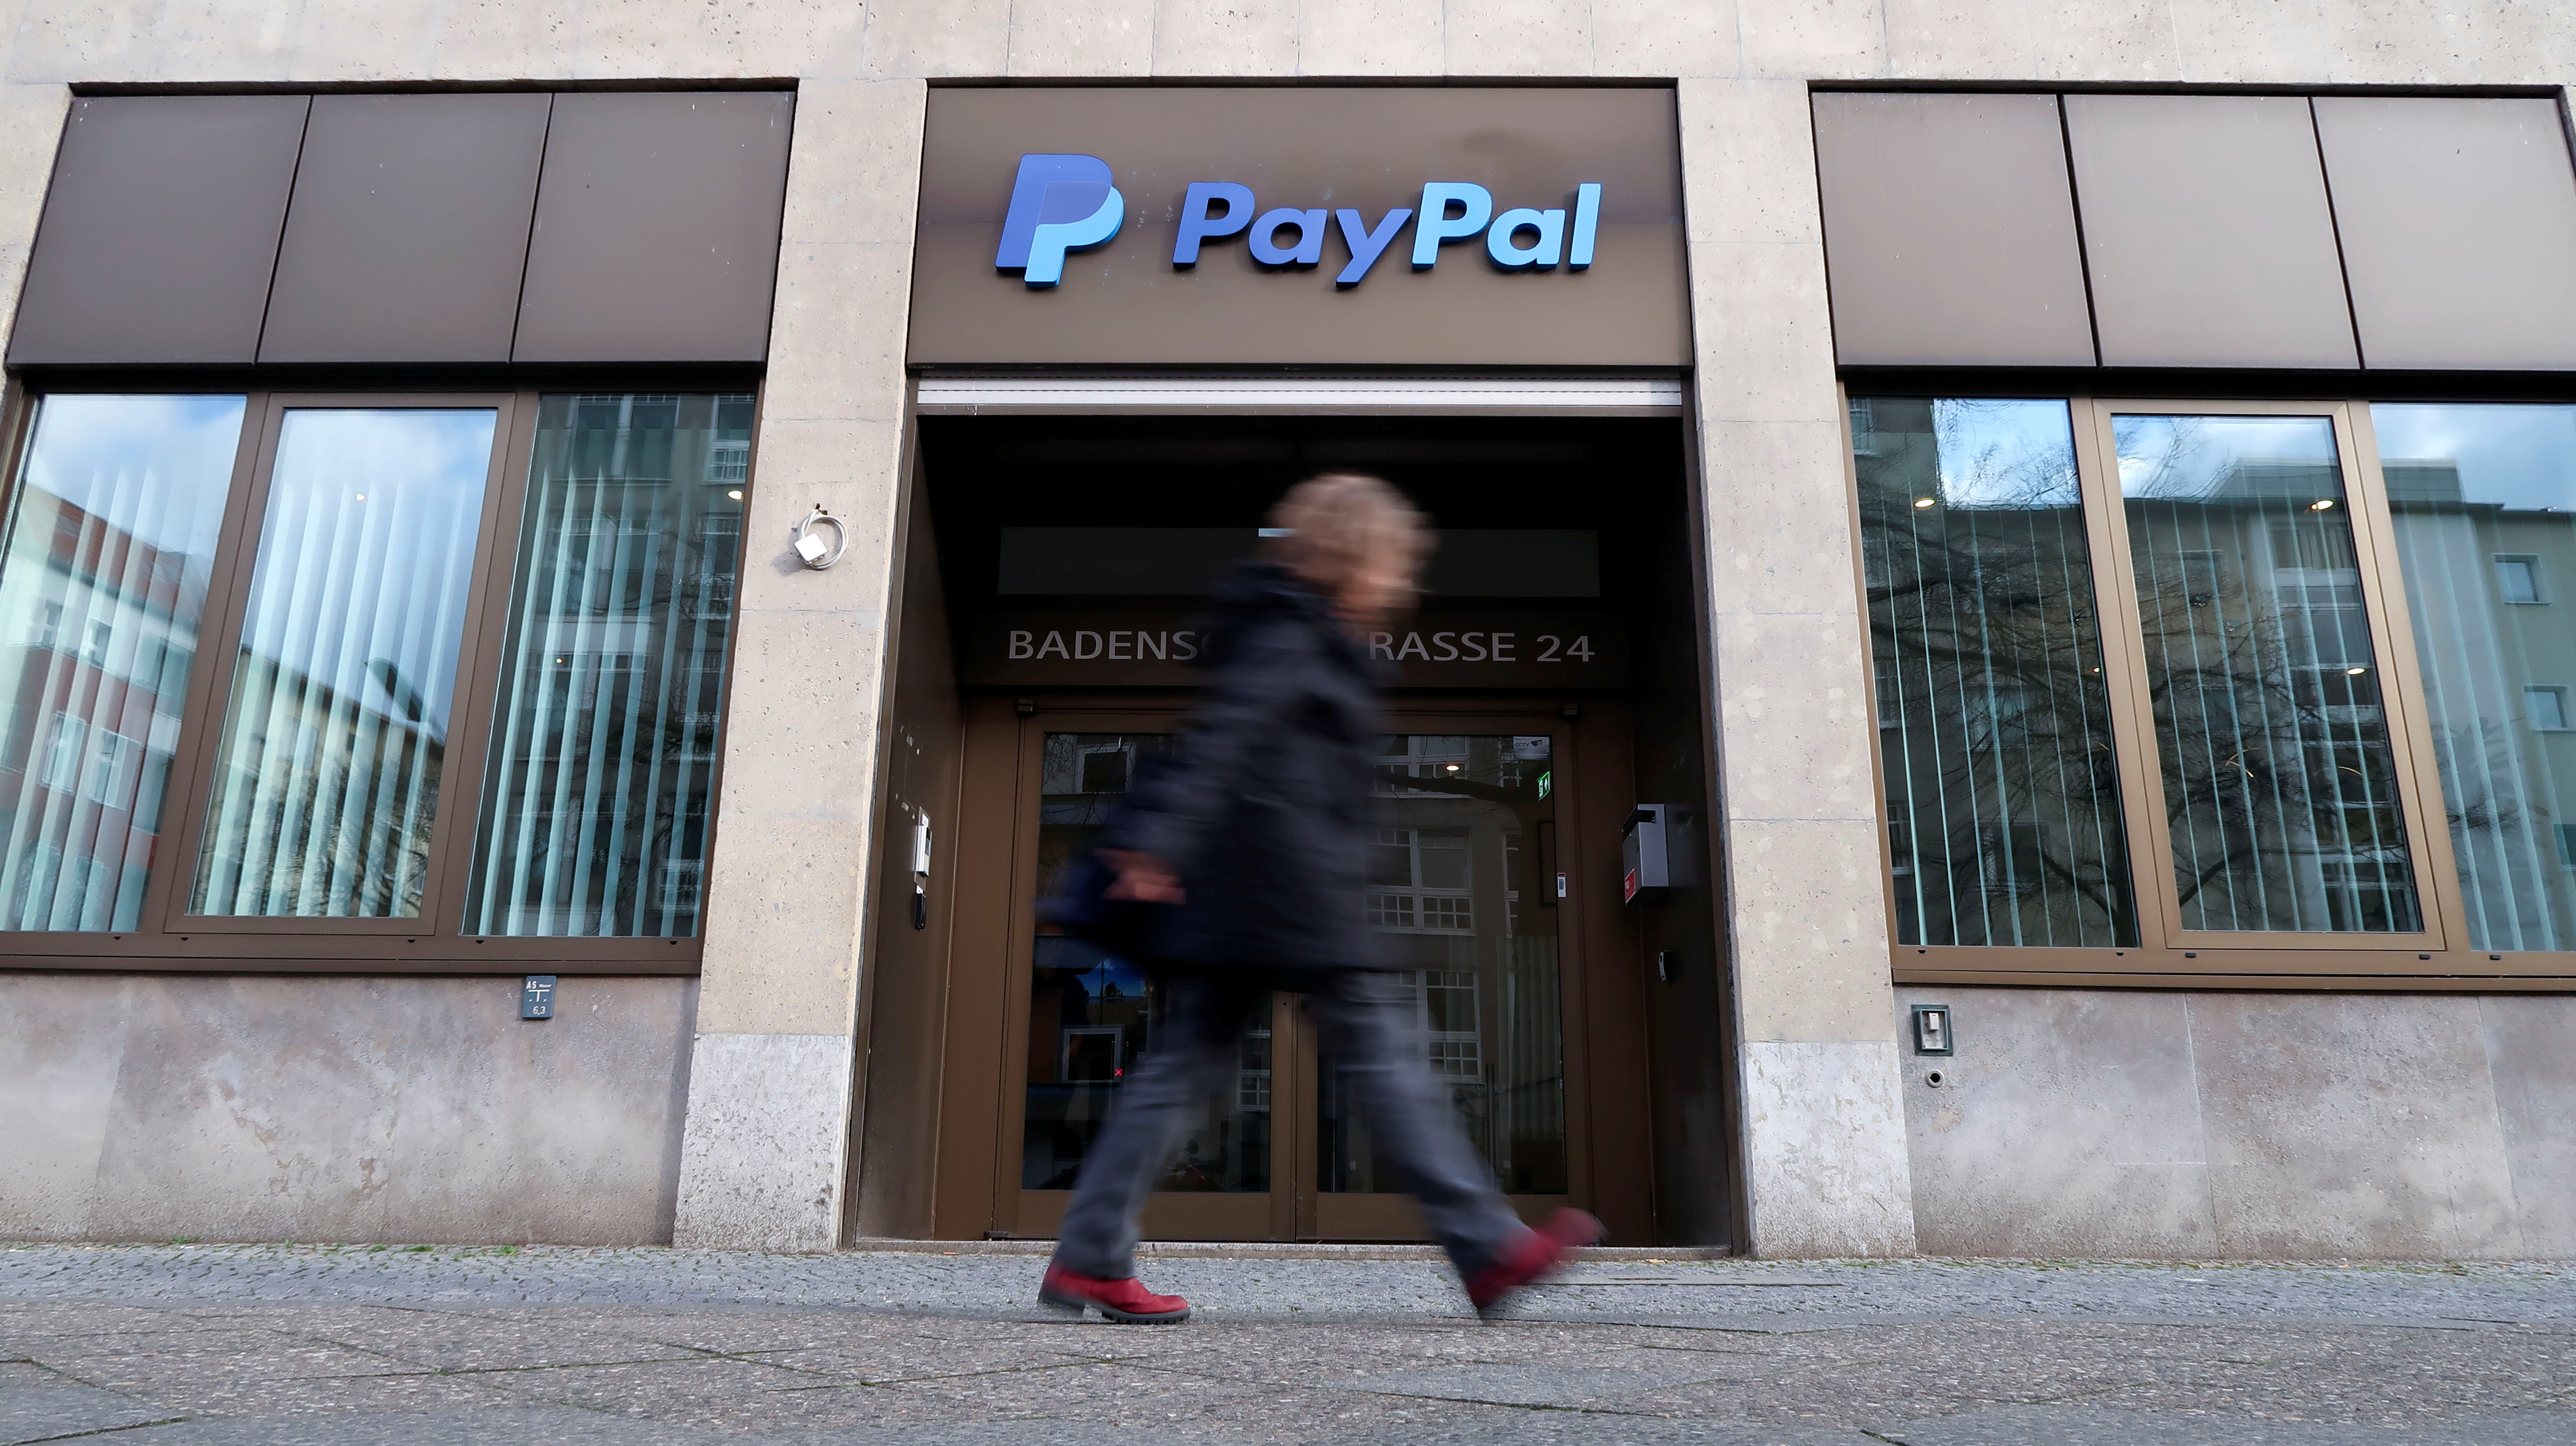 A pedestrian walks past the PayPal logo at an office building in Berlin